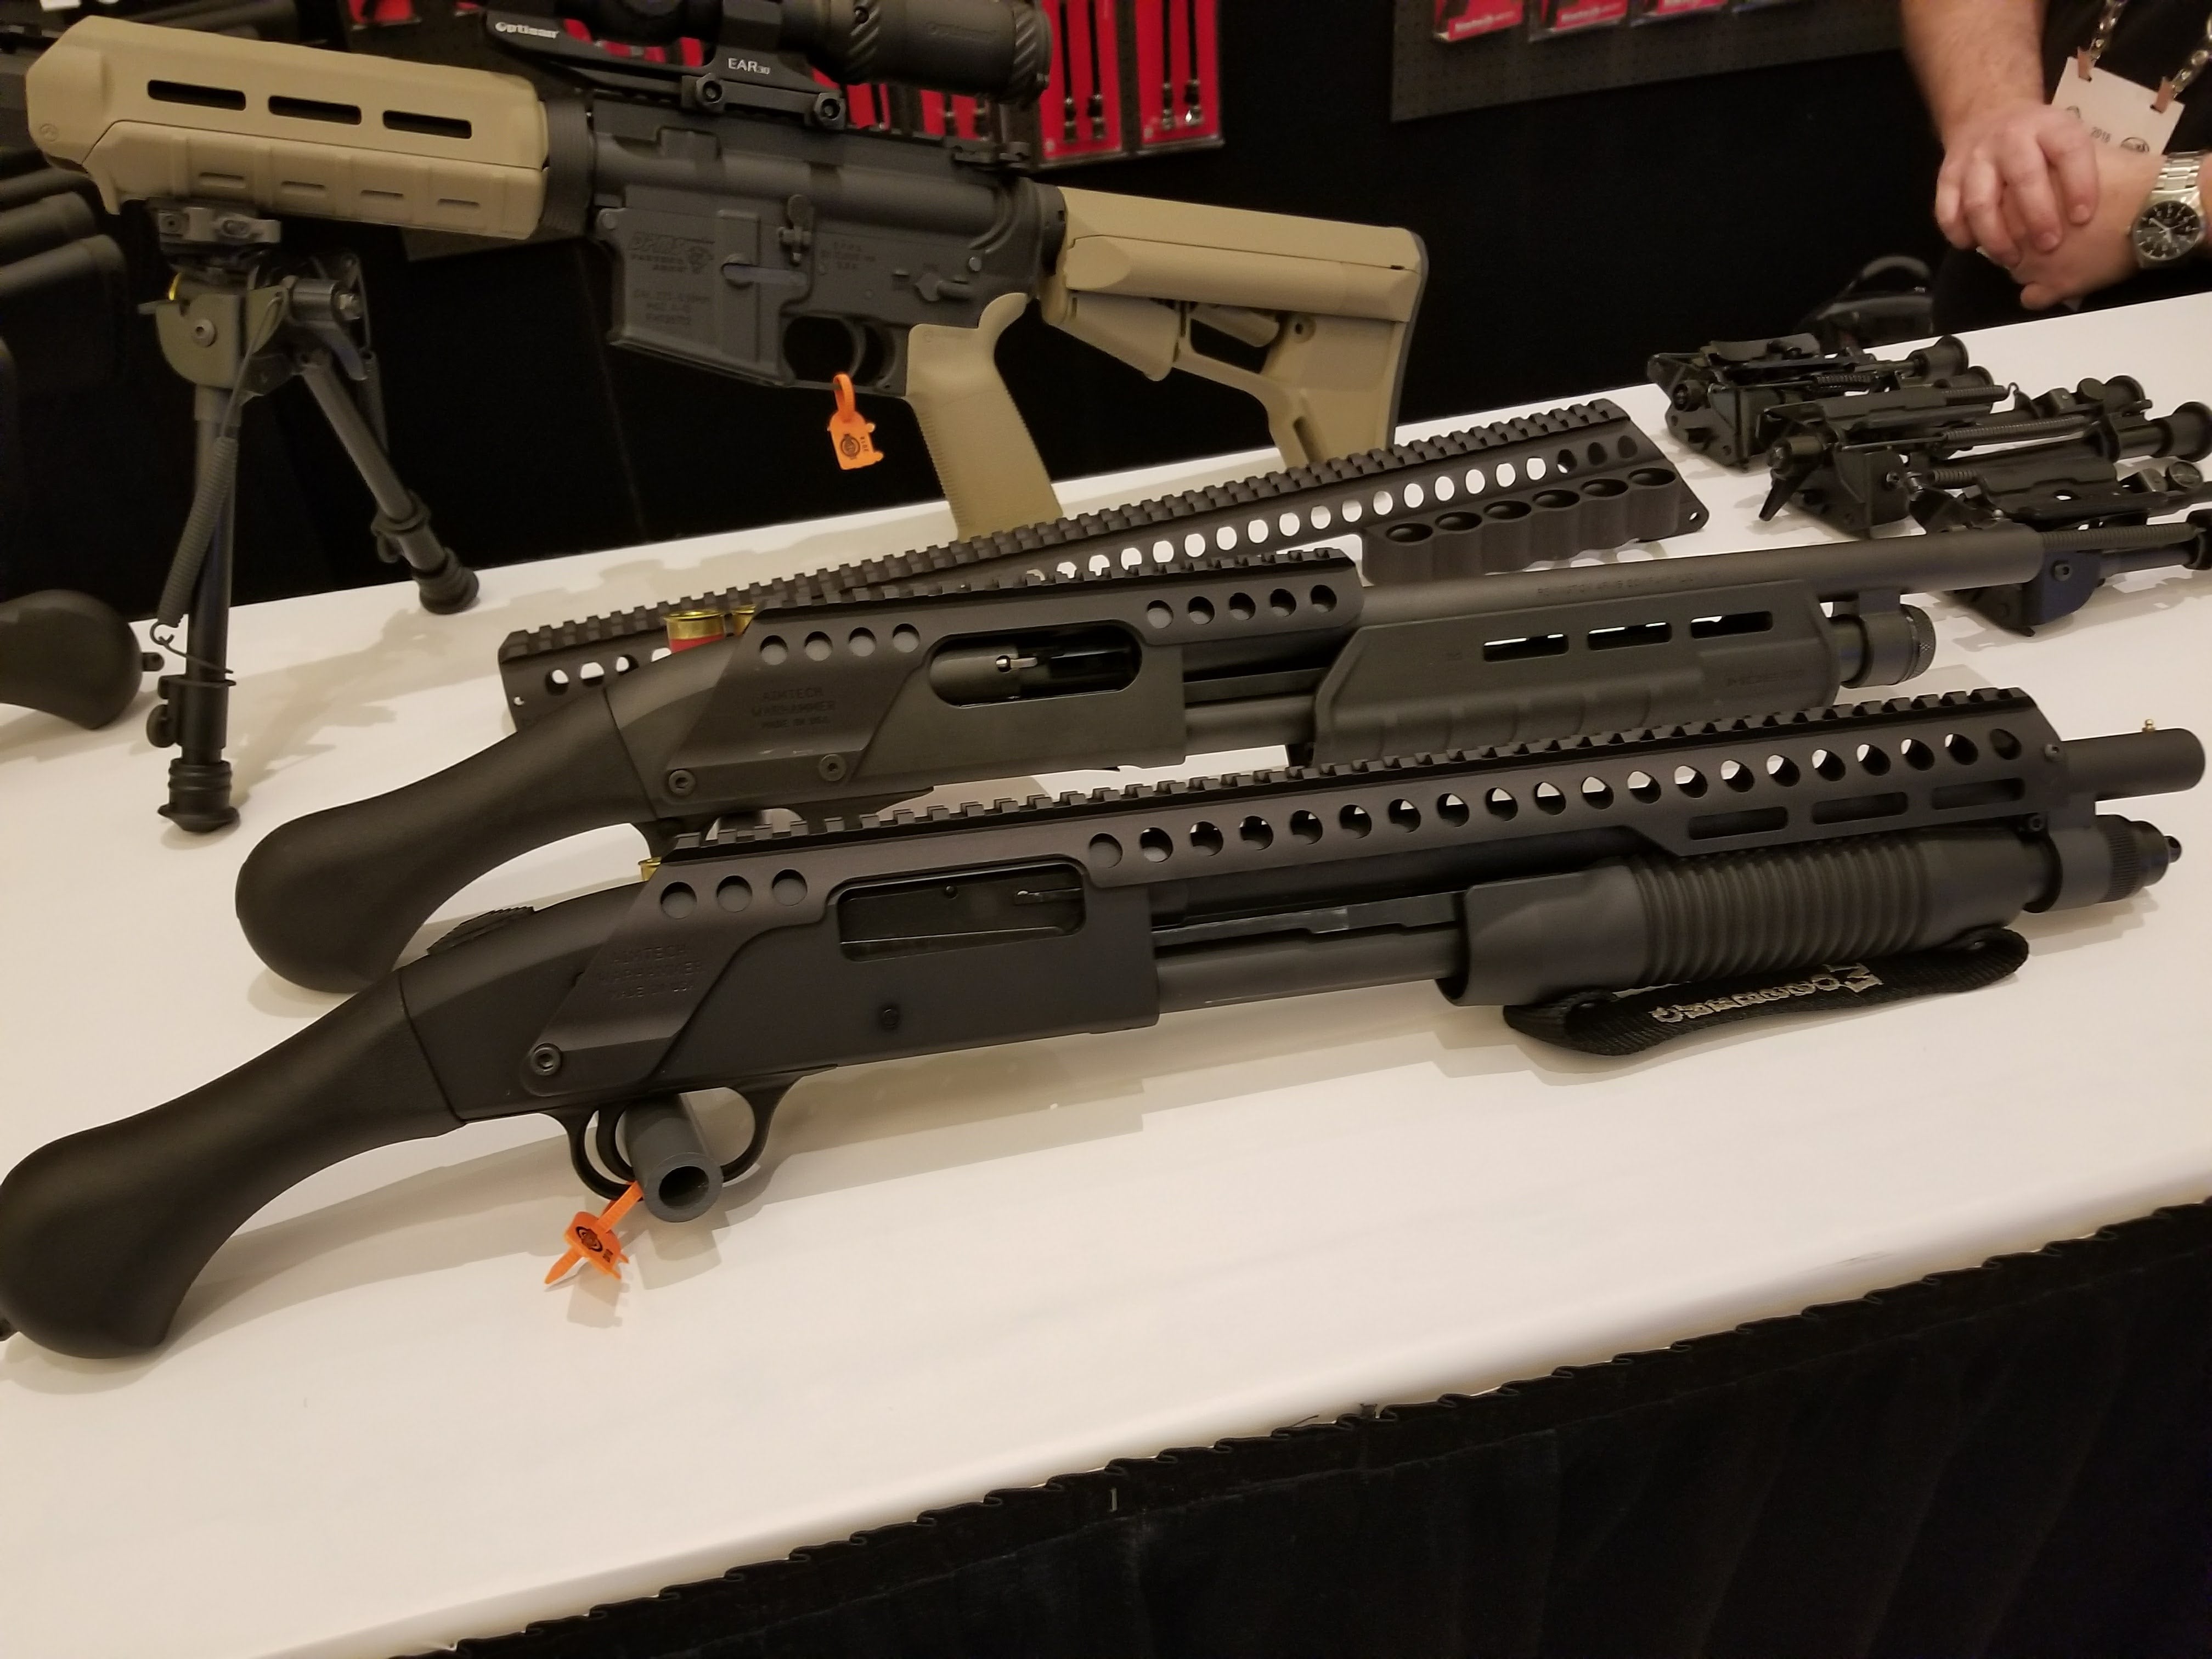 Aimtech Warhammer for Tac-14 and Shockwave - AllOutdoor.comAllOutdoor.com